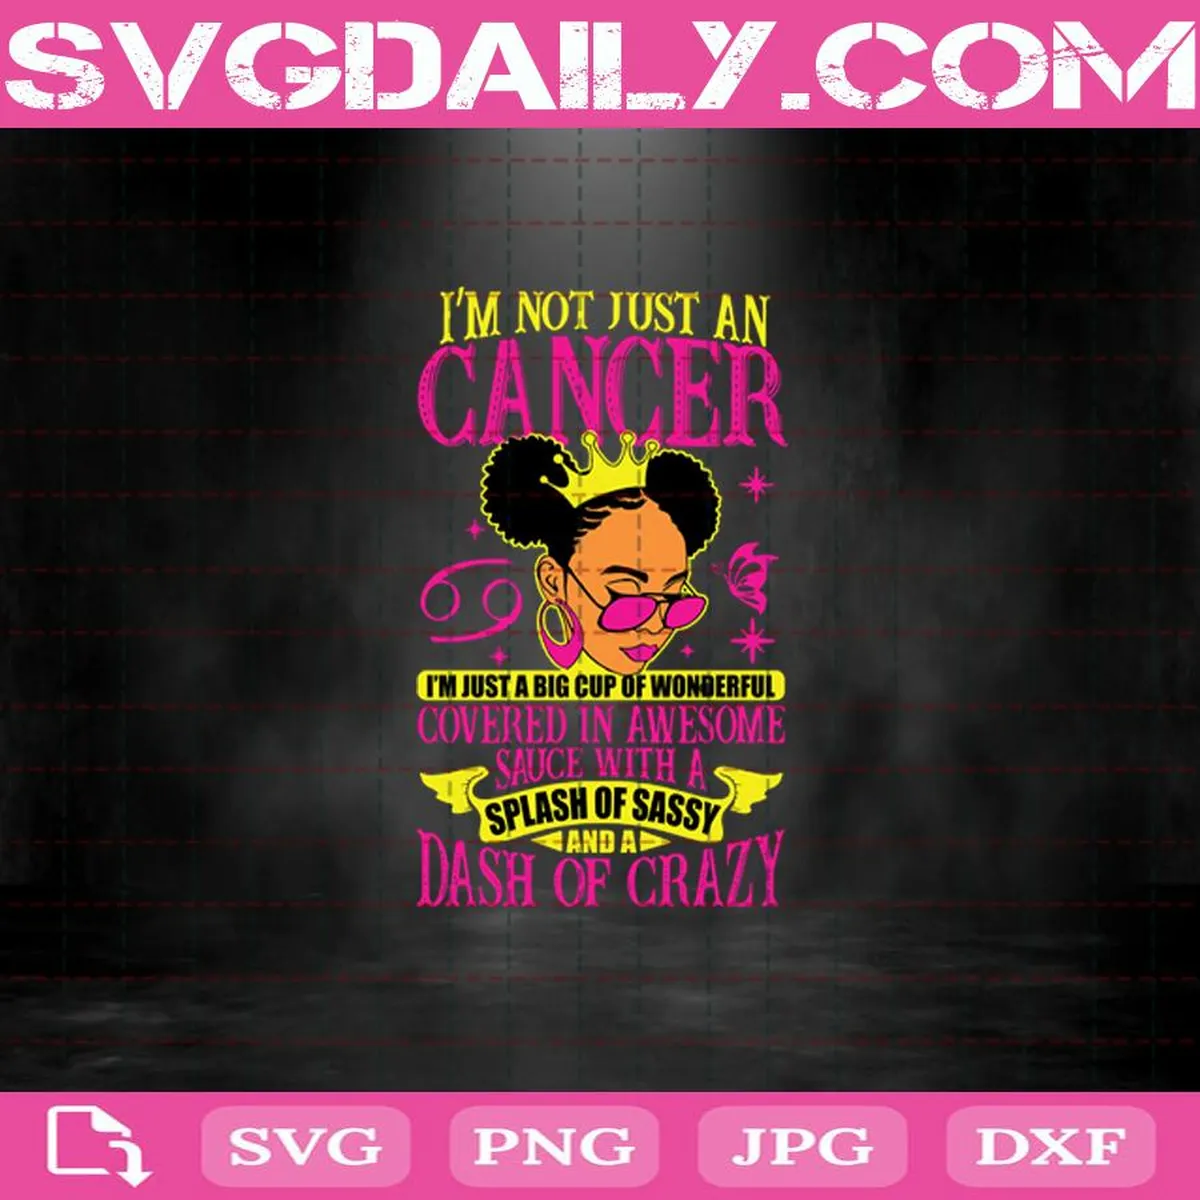 I’m Not Just An Cancer I’m Just A Big Cup Of Wonderful Covered In Awesome Sauce With A Splash Of Sassy And A Dash Of Crazy Svg, Cancer Svg